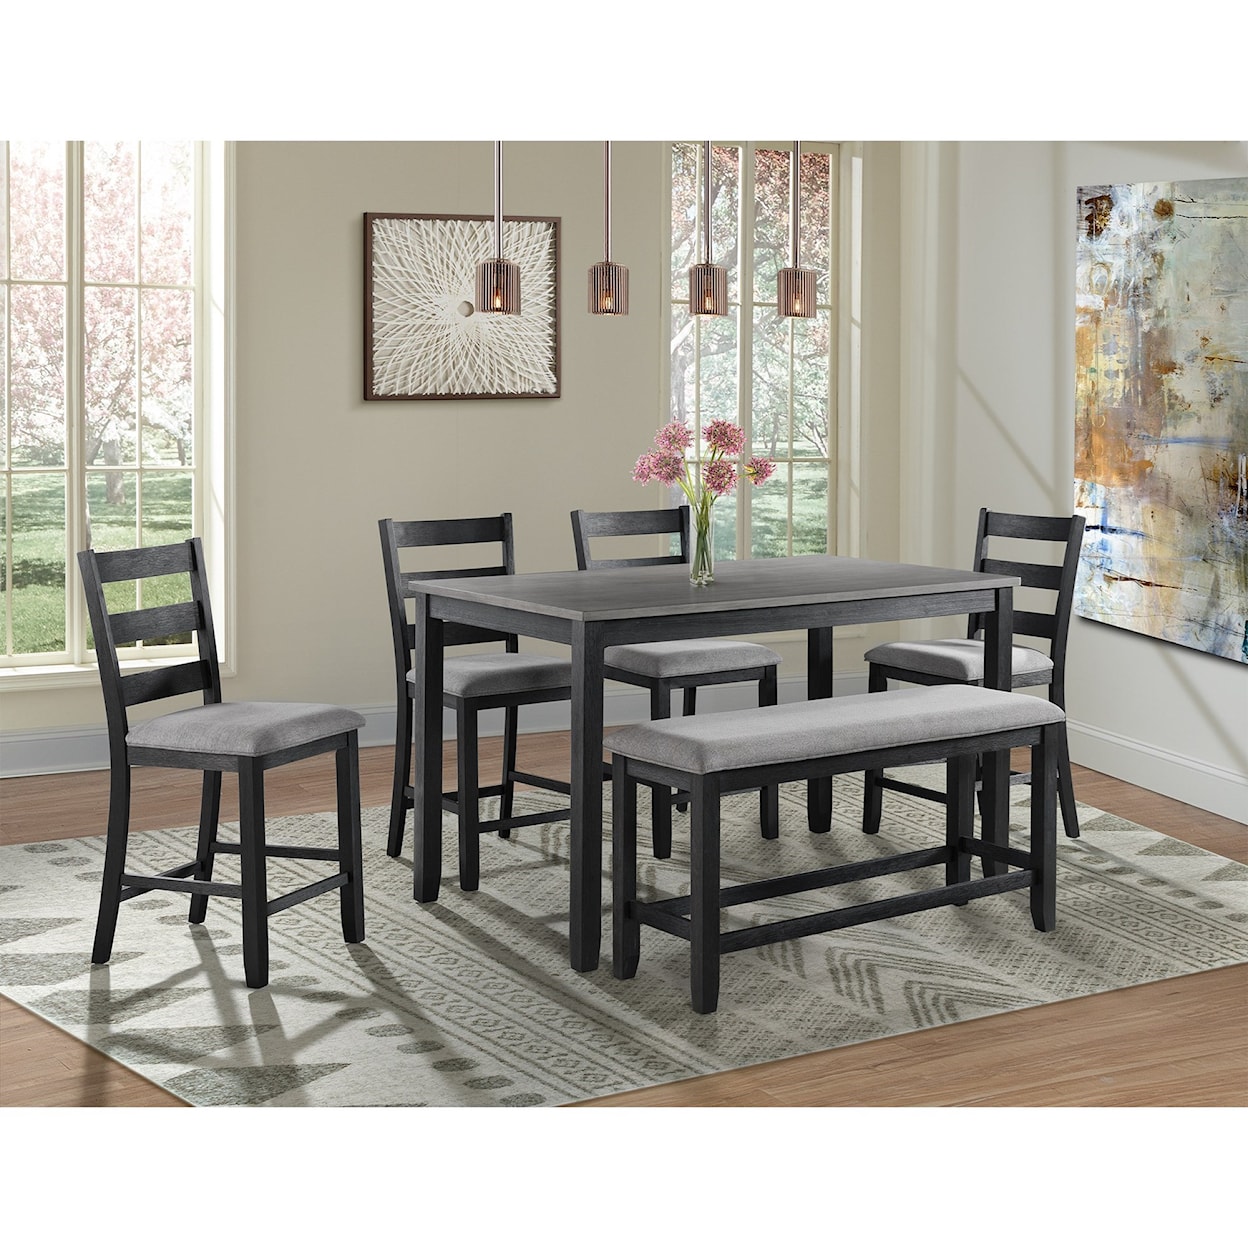 Elements International Martin 6-Piece Counter Height Dining Set with Bench